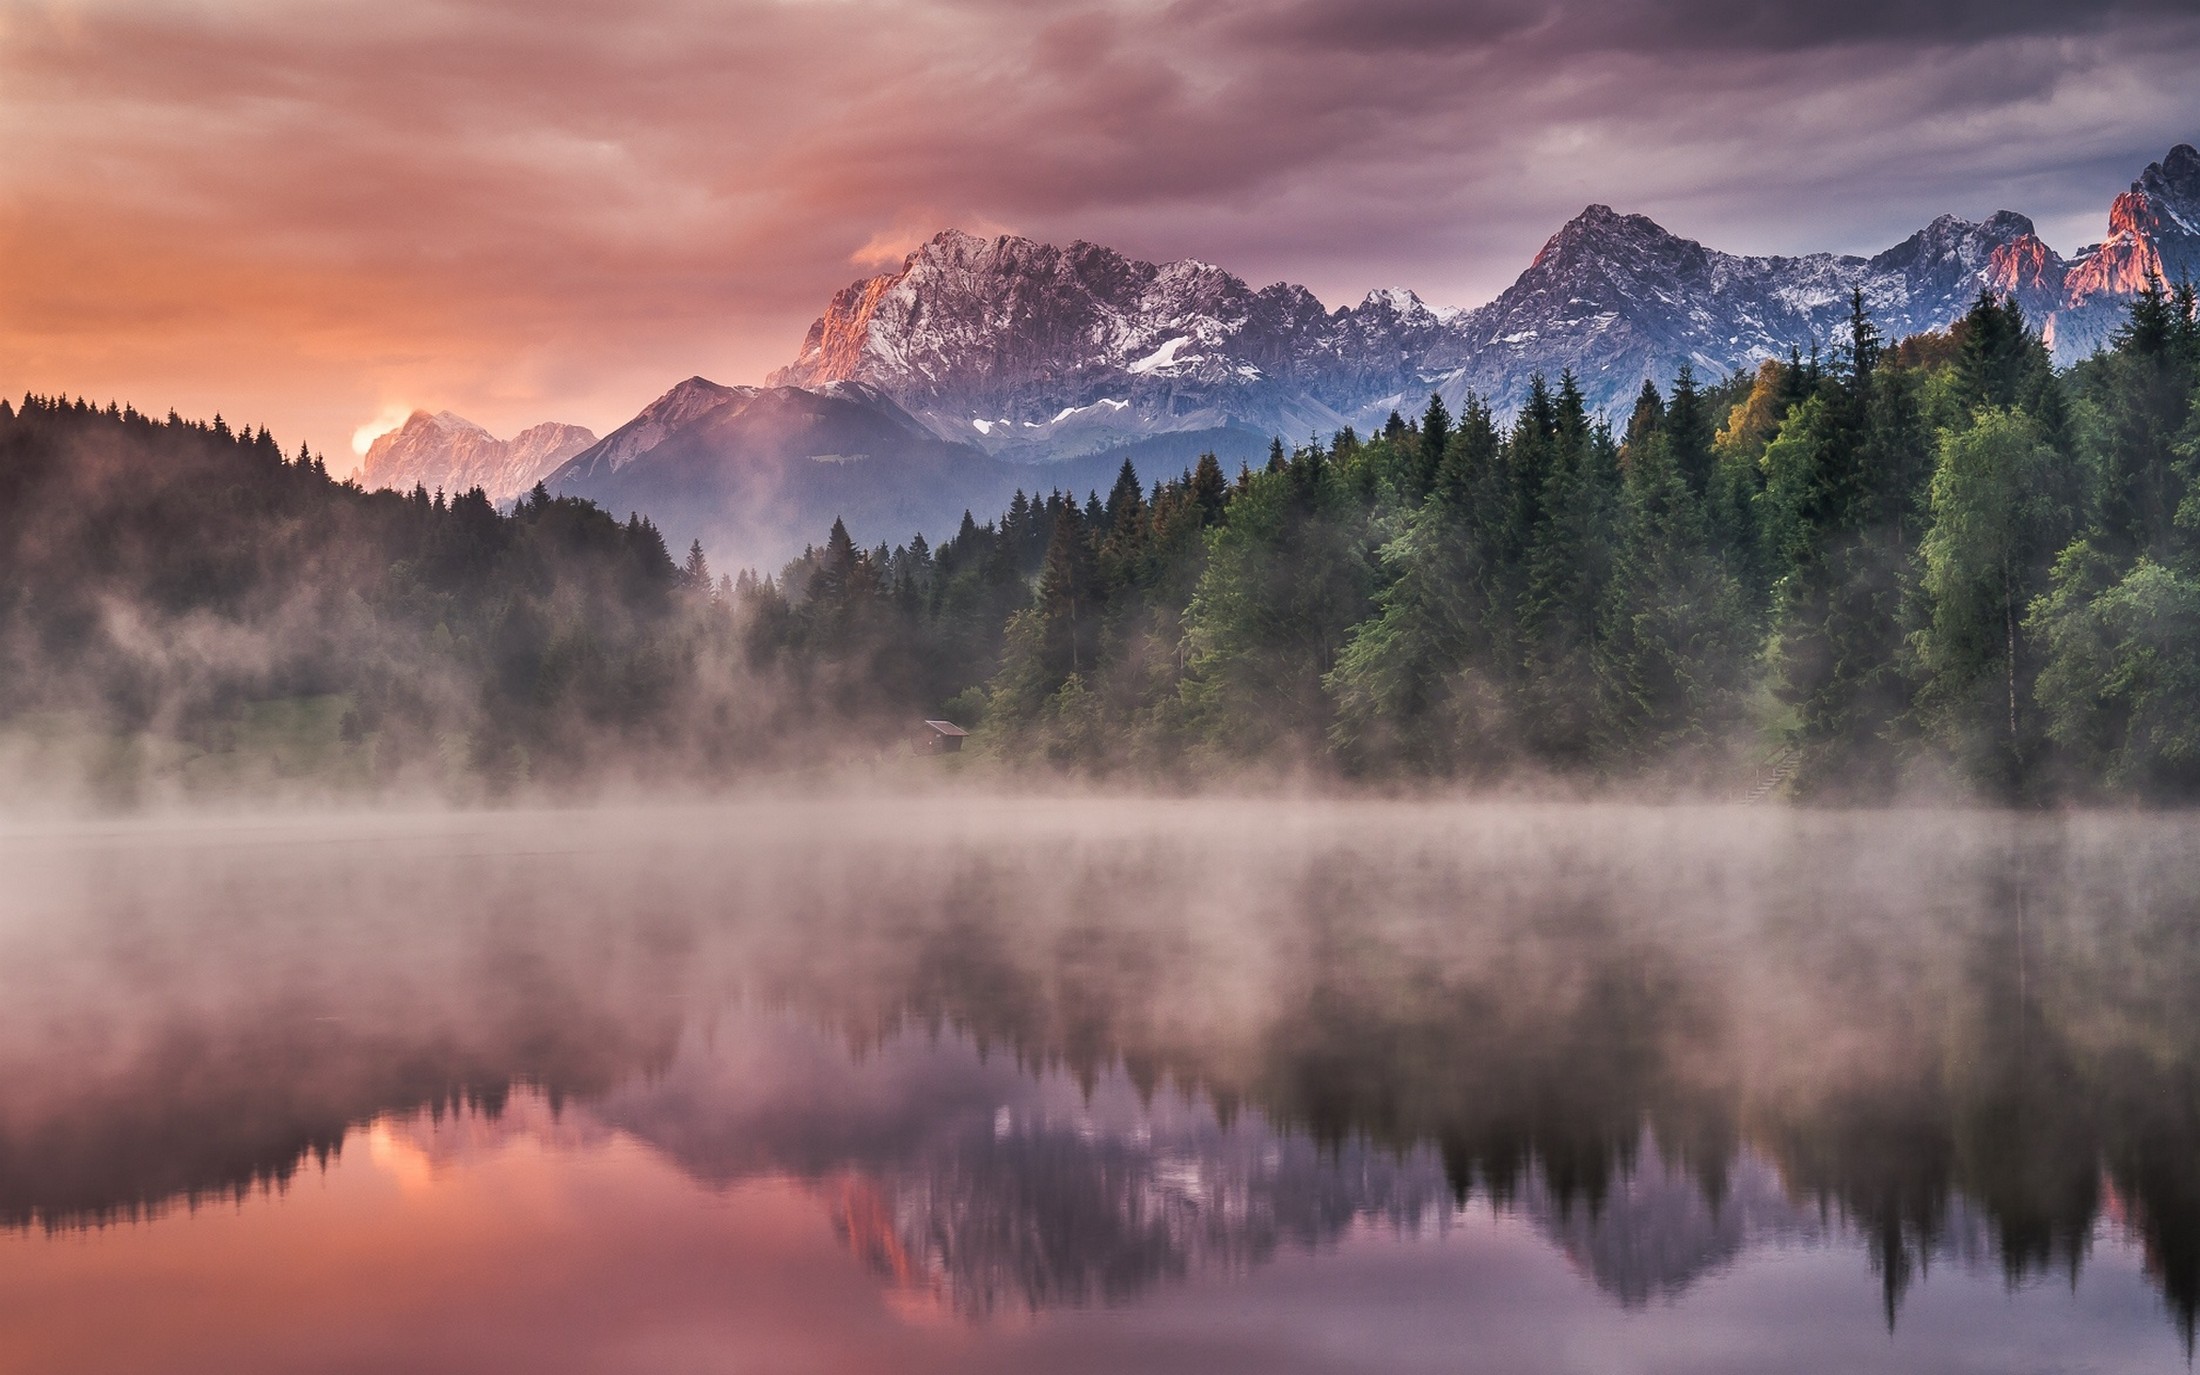 General 2200x1375 landscape nature lake forest mist mountains snowy peak Germany clouds reflection trees water cabin